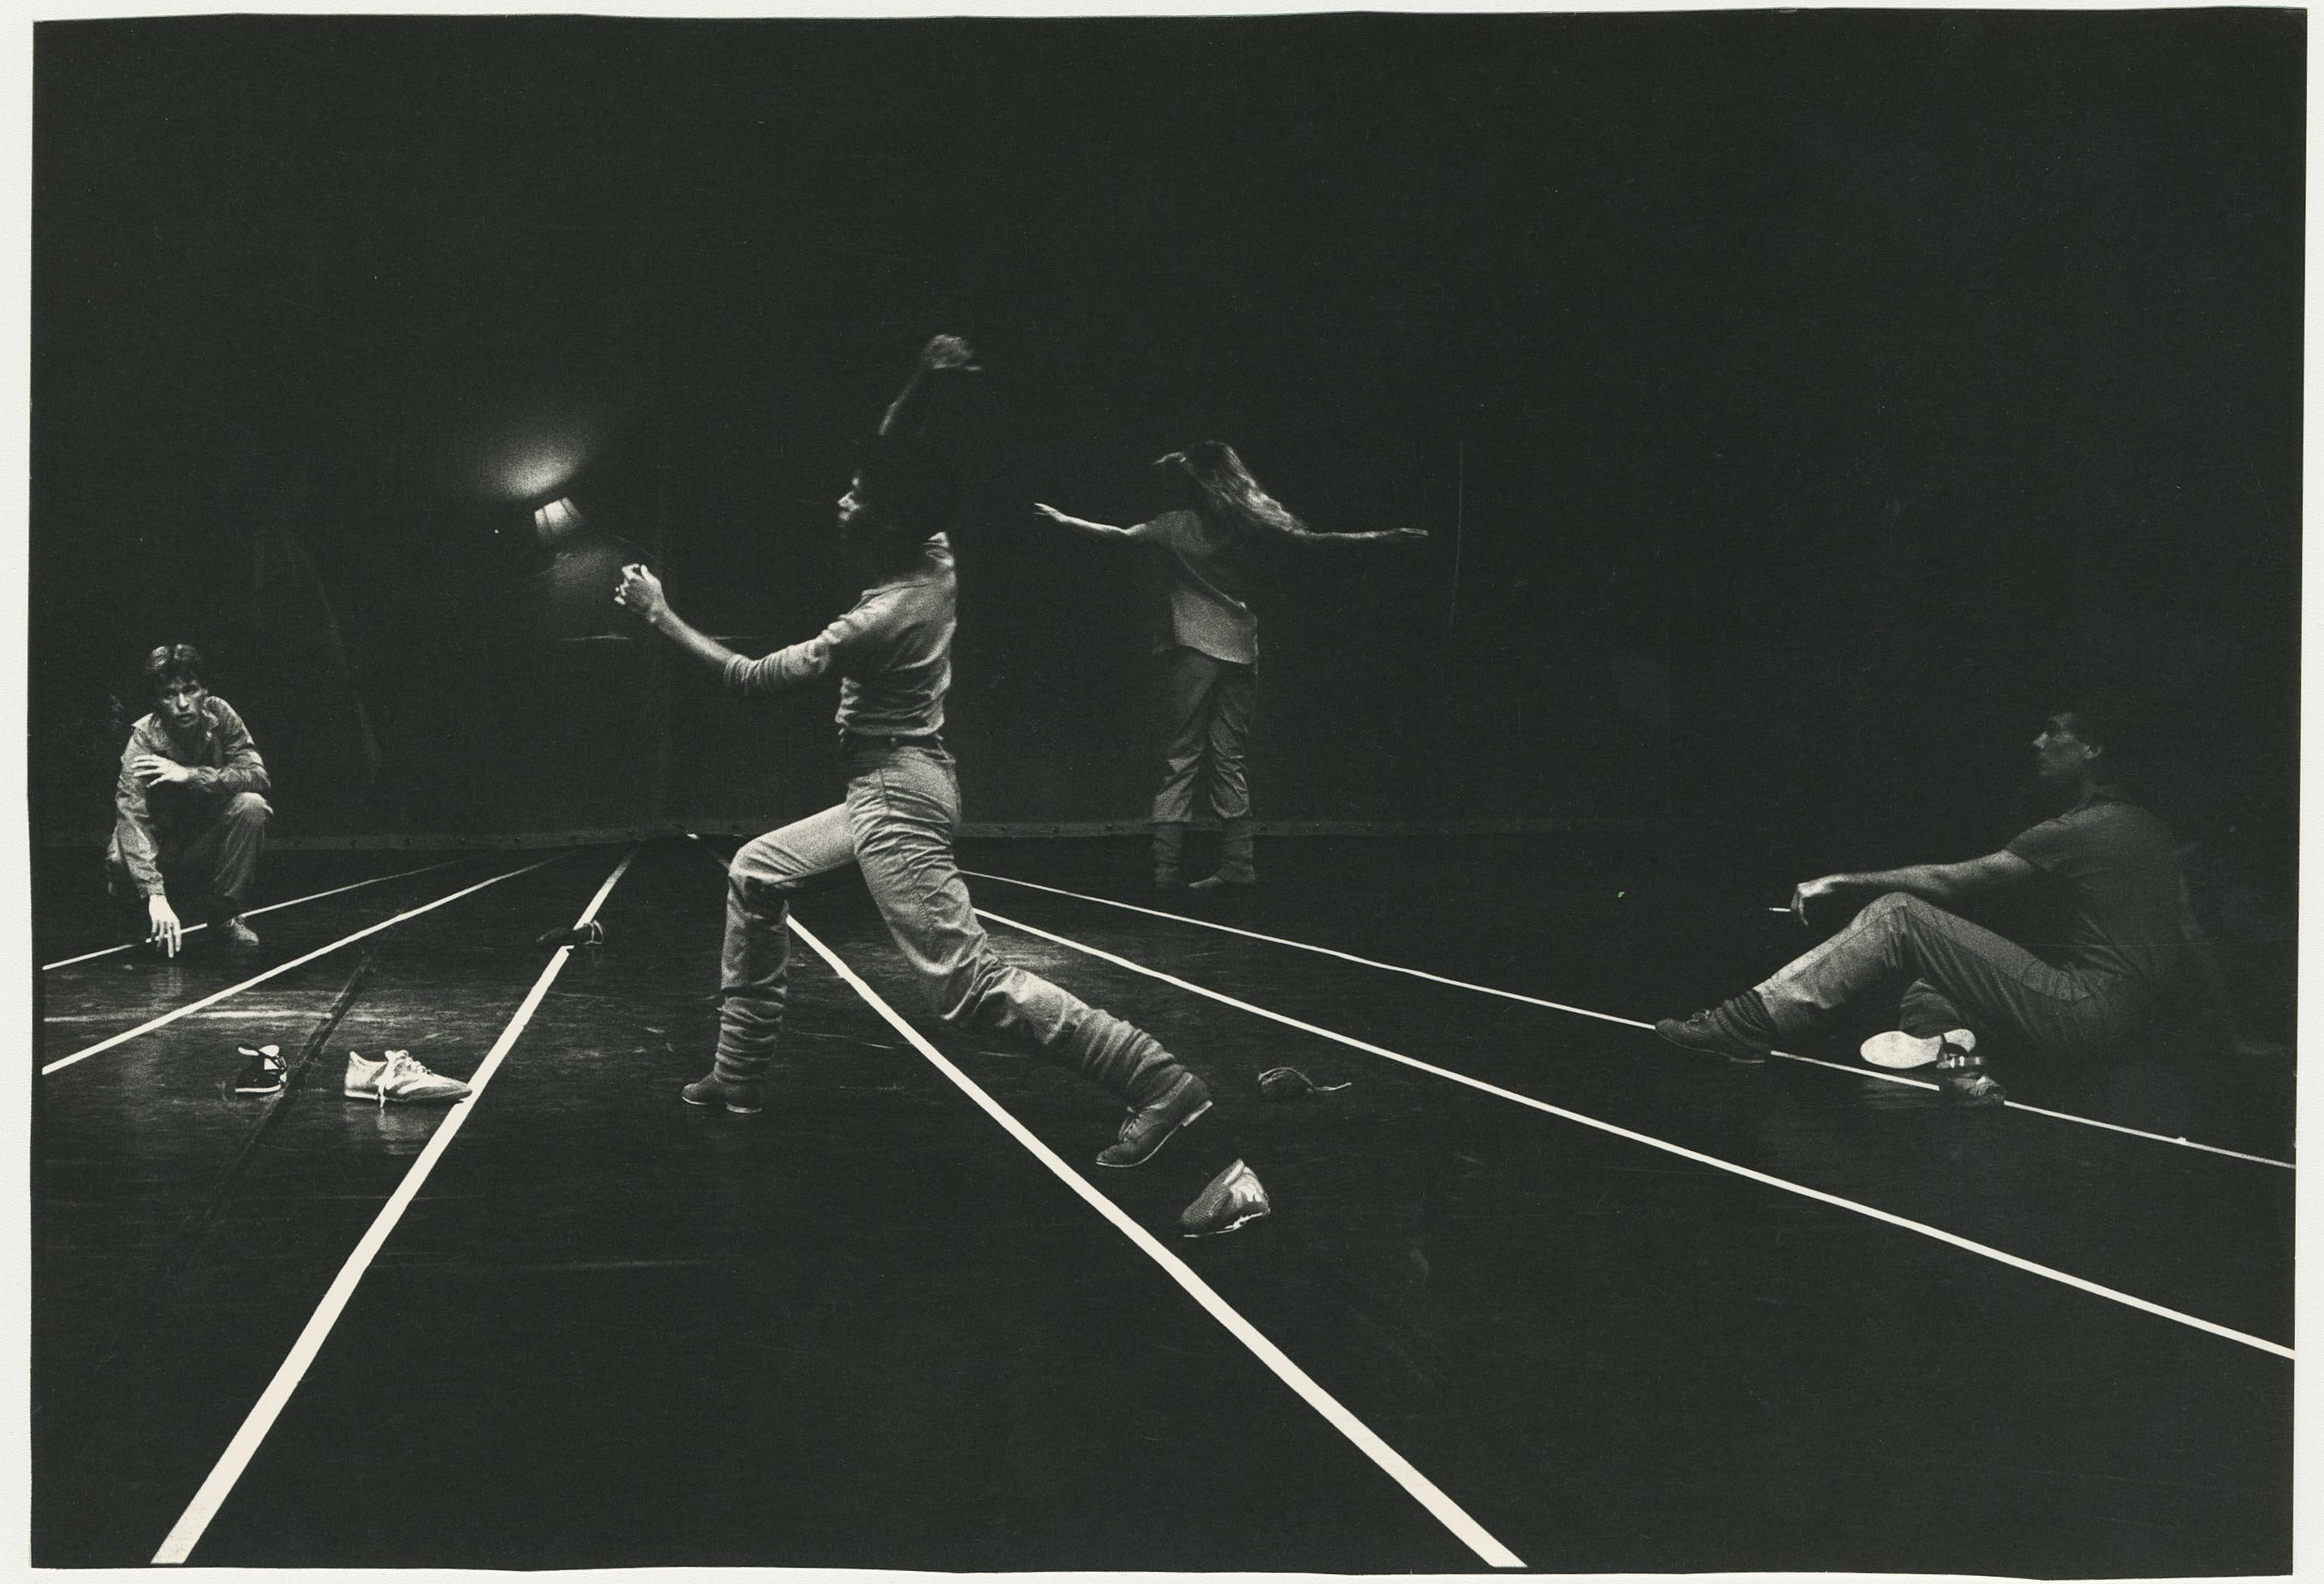 Four dancers moving on stage - parallel white lines on the floor